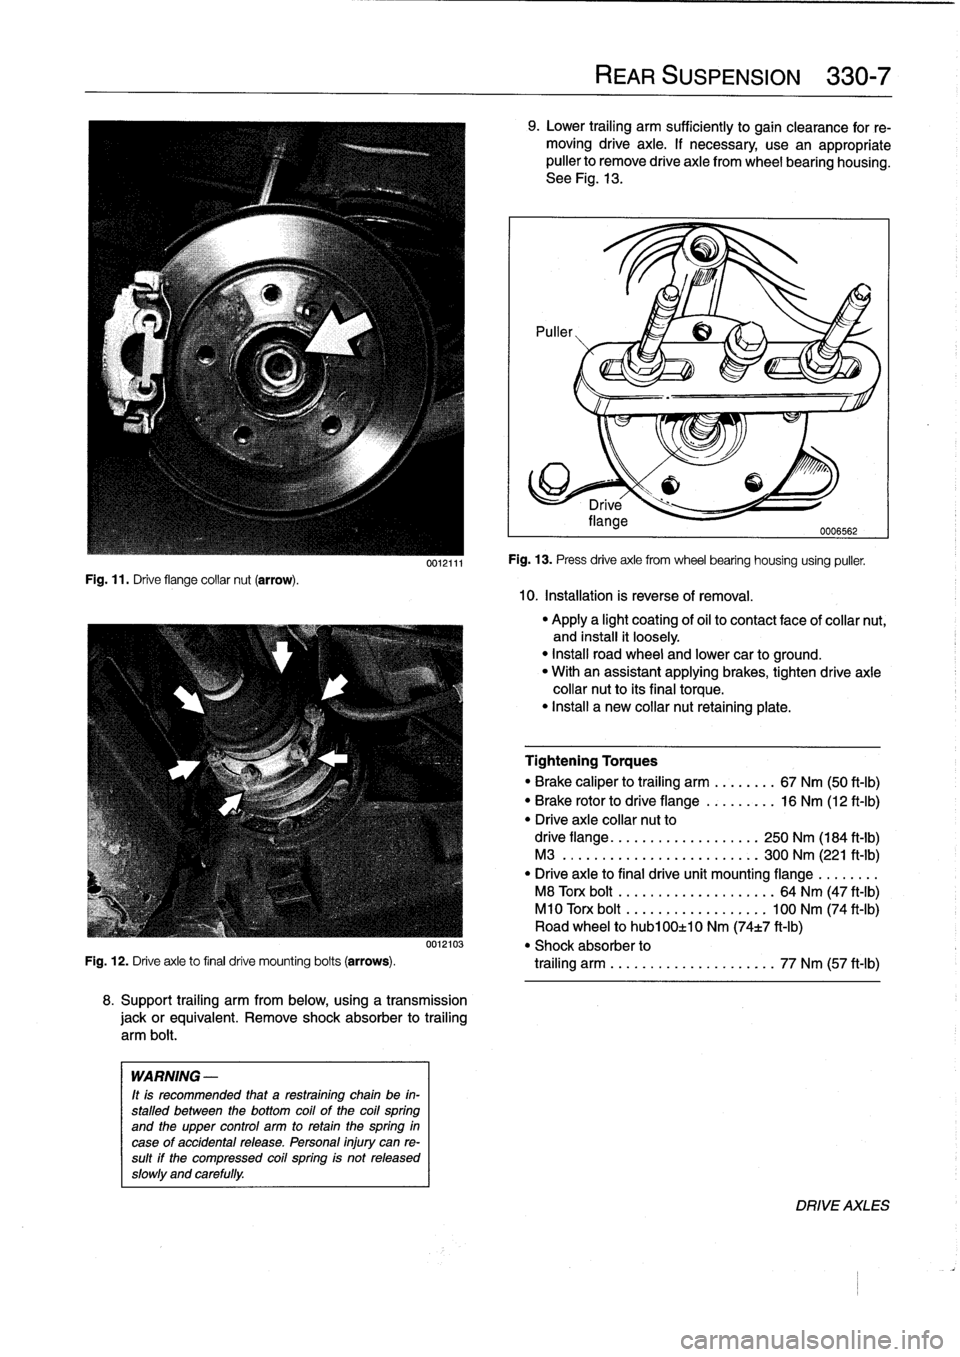 BMW 318i 1997 E36 Service Manual 
Fig
.
11
.
Drive
flange
collar
nut
(arrow)
.

0012111

8
.
Support
trailing
arm
from
below,
using
a
transmission

jackorequivalent
.
Remove
shock
absorber
to
trailing

arm
bolt
.

WARNING
-

It
is
re